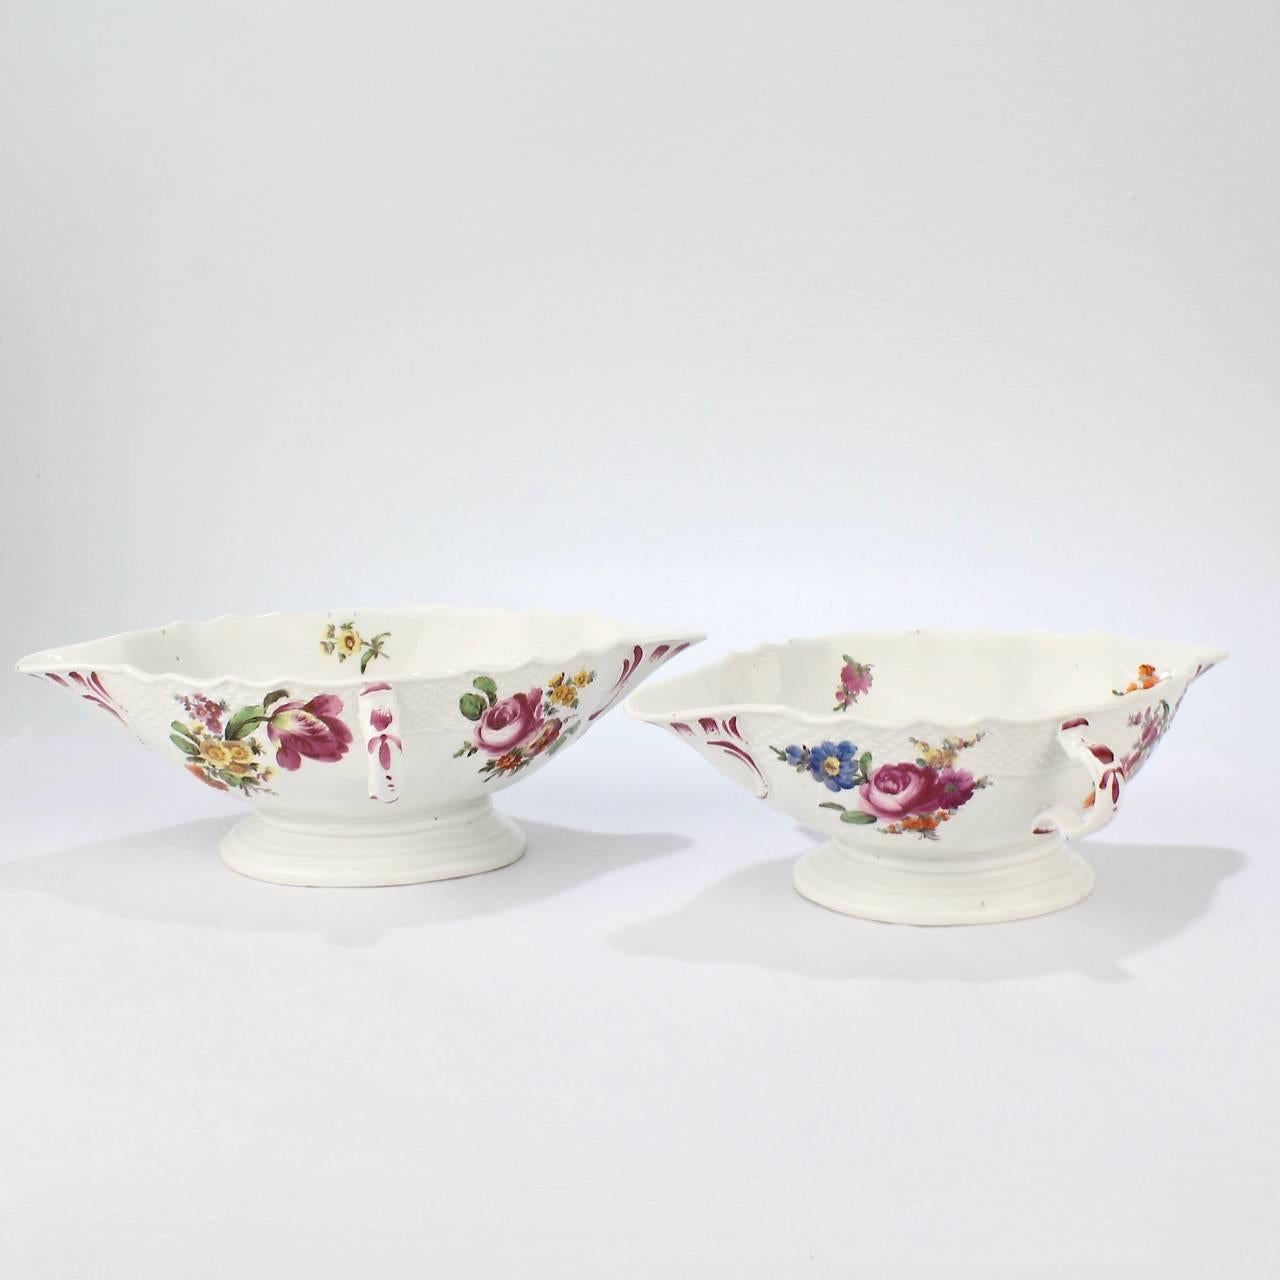 Rococo Pair of Antique 18th Century Imperial Vienna Porcelain Sauce or Gravy Boats For Sale